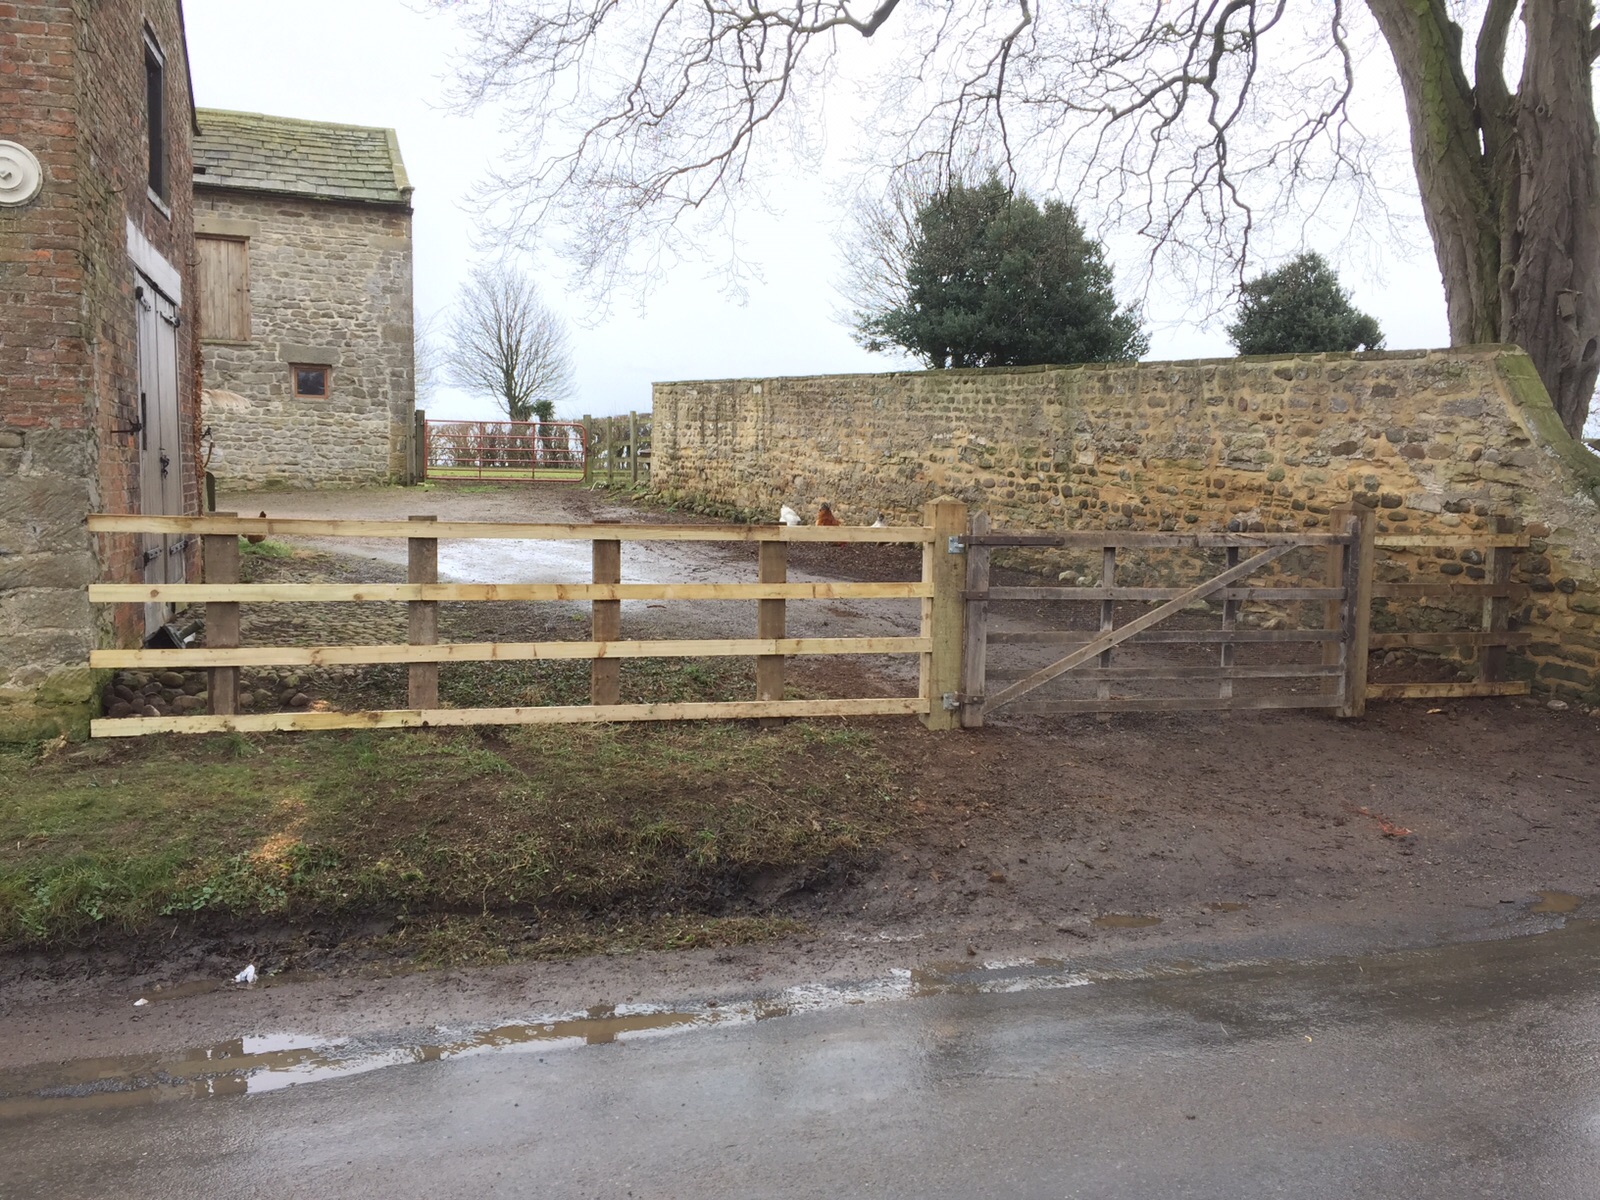 Farm fence and gate